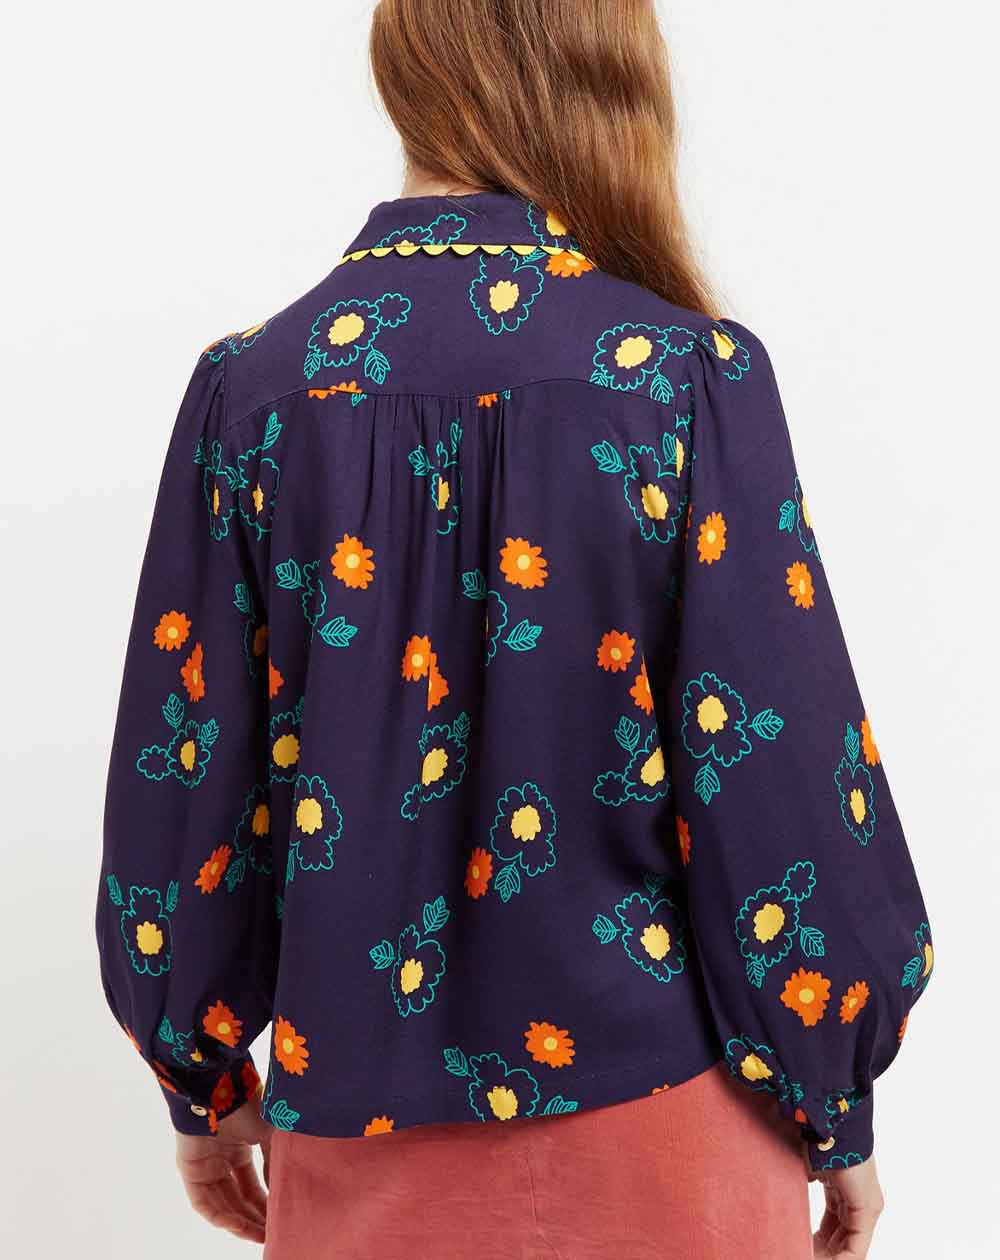 Louche Olena Clarice Floral Print Ric Rac Trimmed Blouse in Navy